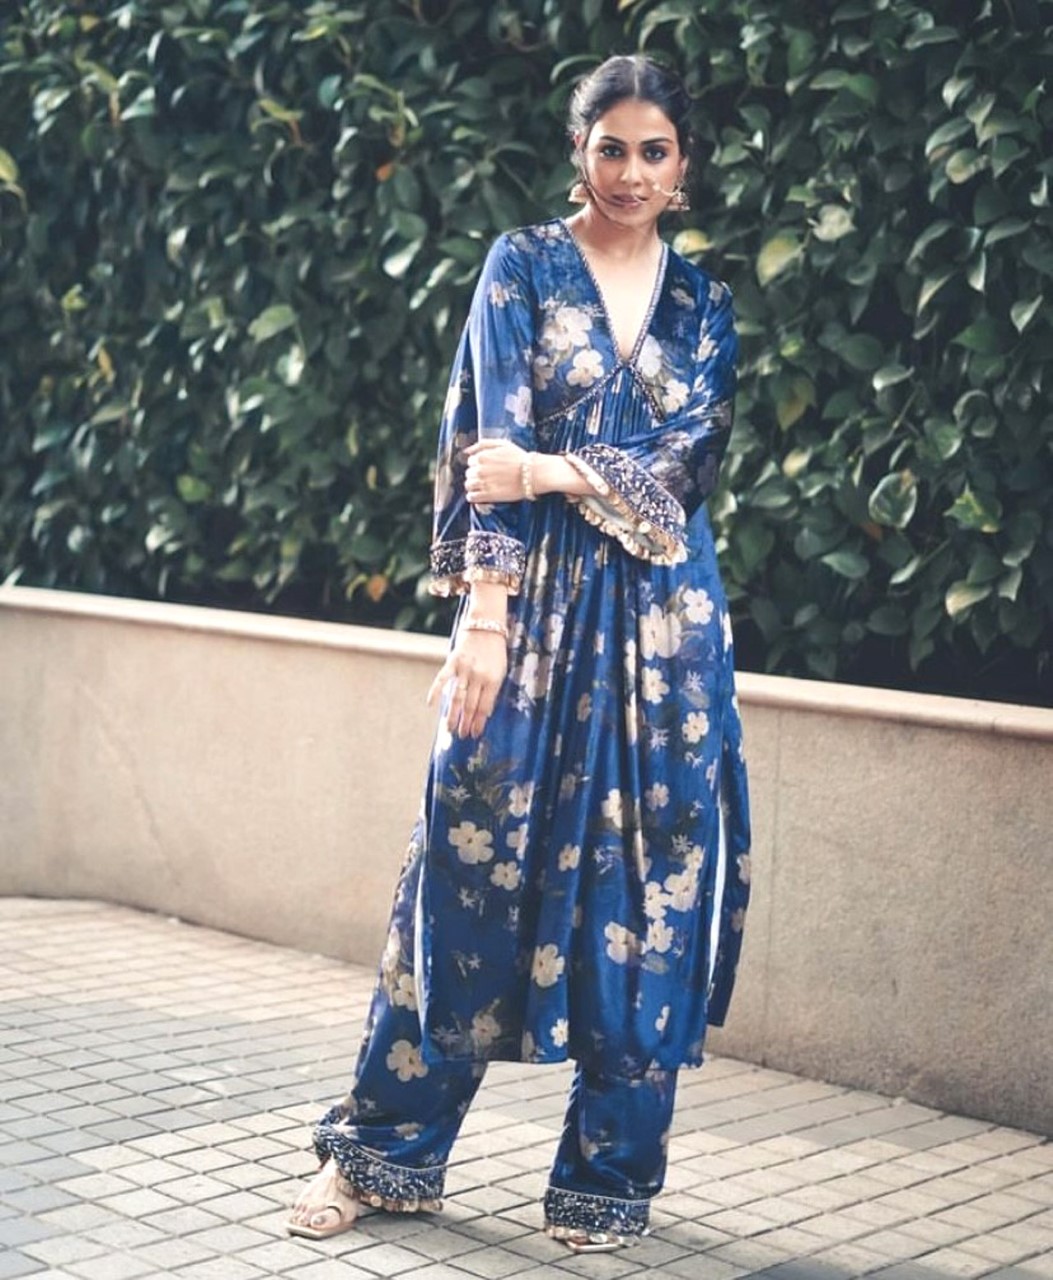 Genelia D’souza is a sight to behold in deep blue velvet kaftan set and nath